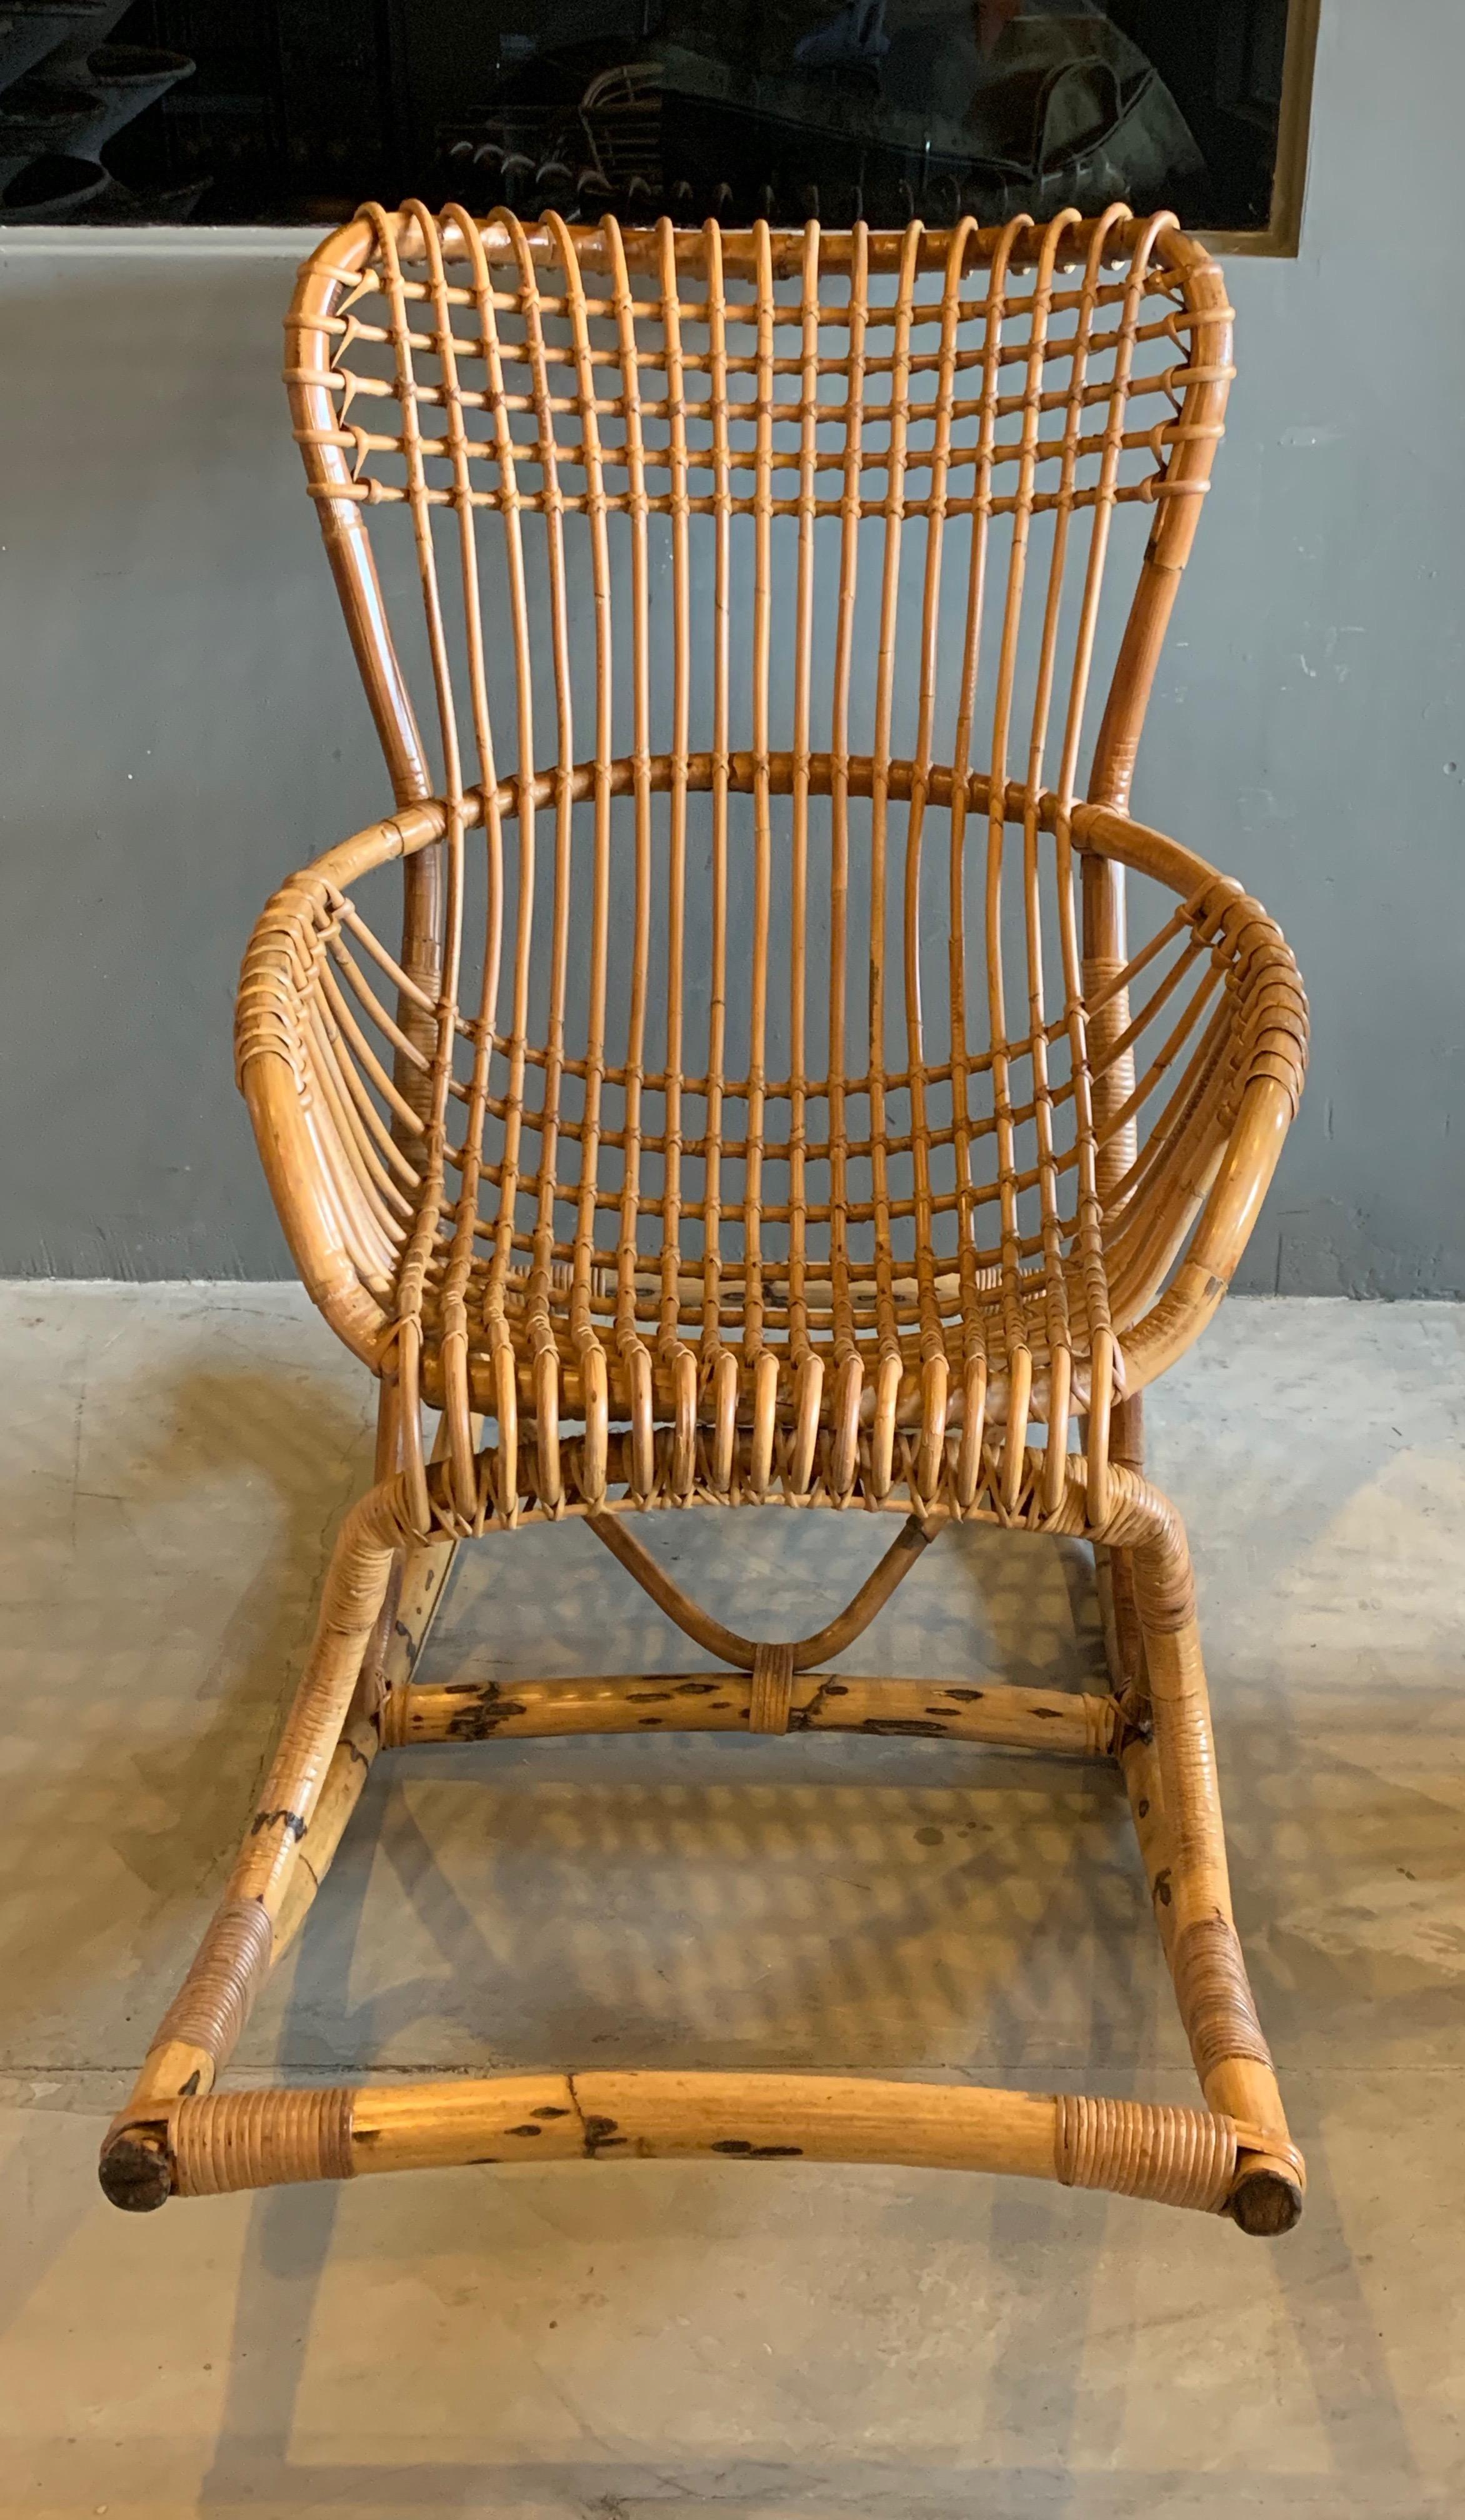 Gorgeous rattan and bamboo rocking chair by Bonacina. Made in Italy. Very good vintage condition. Great sculptural chair. Large chair with a ton of presence.